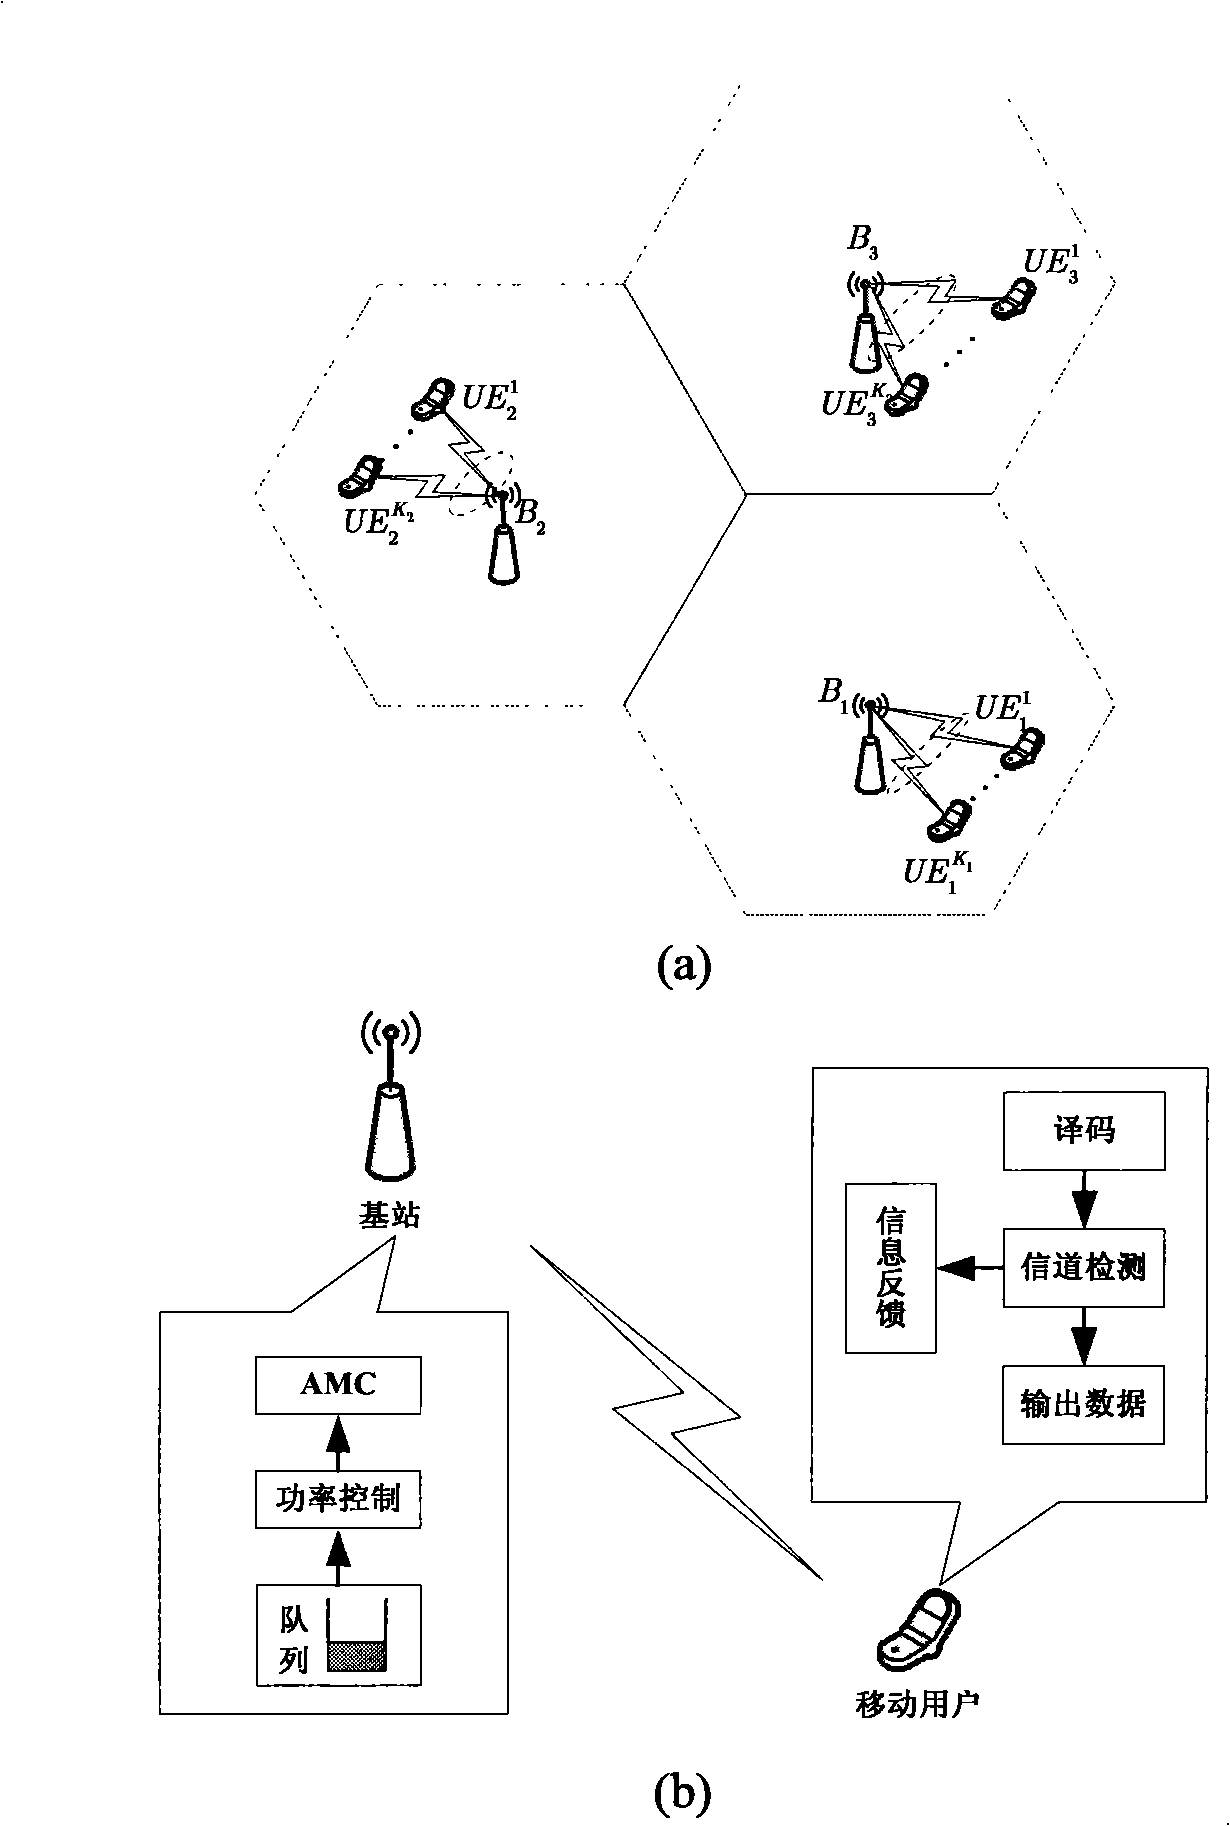 Multi-cell interference coordination power-distribution method for mobile multi-casting system